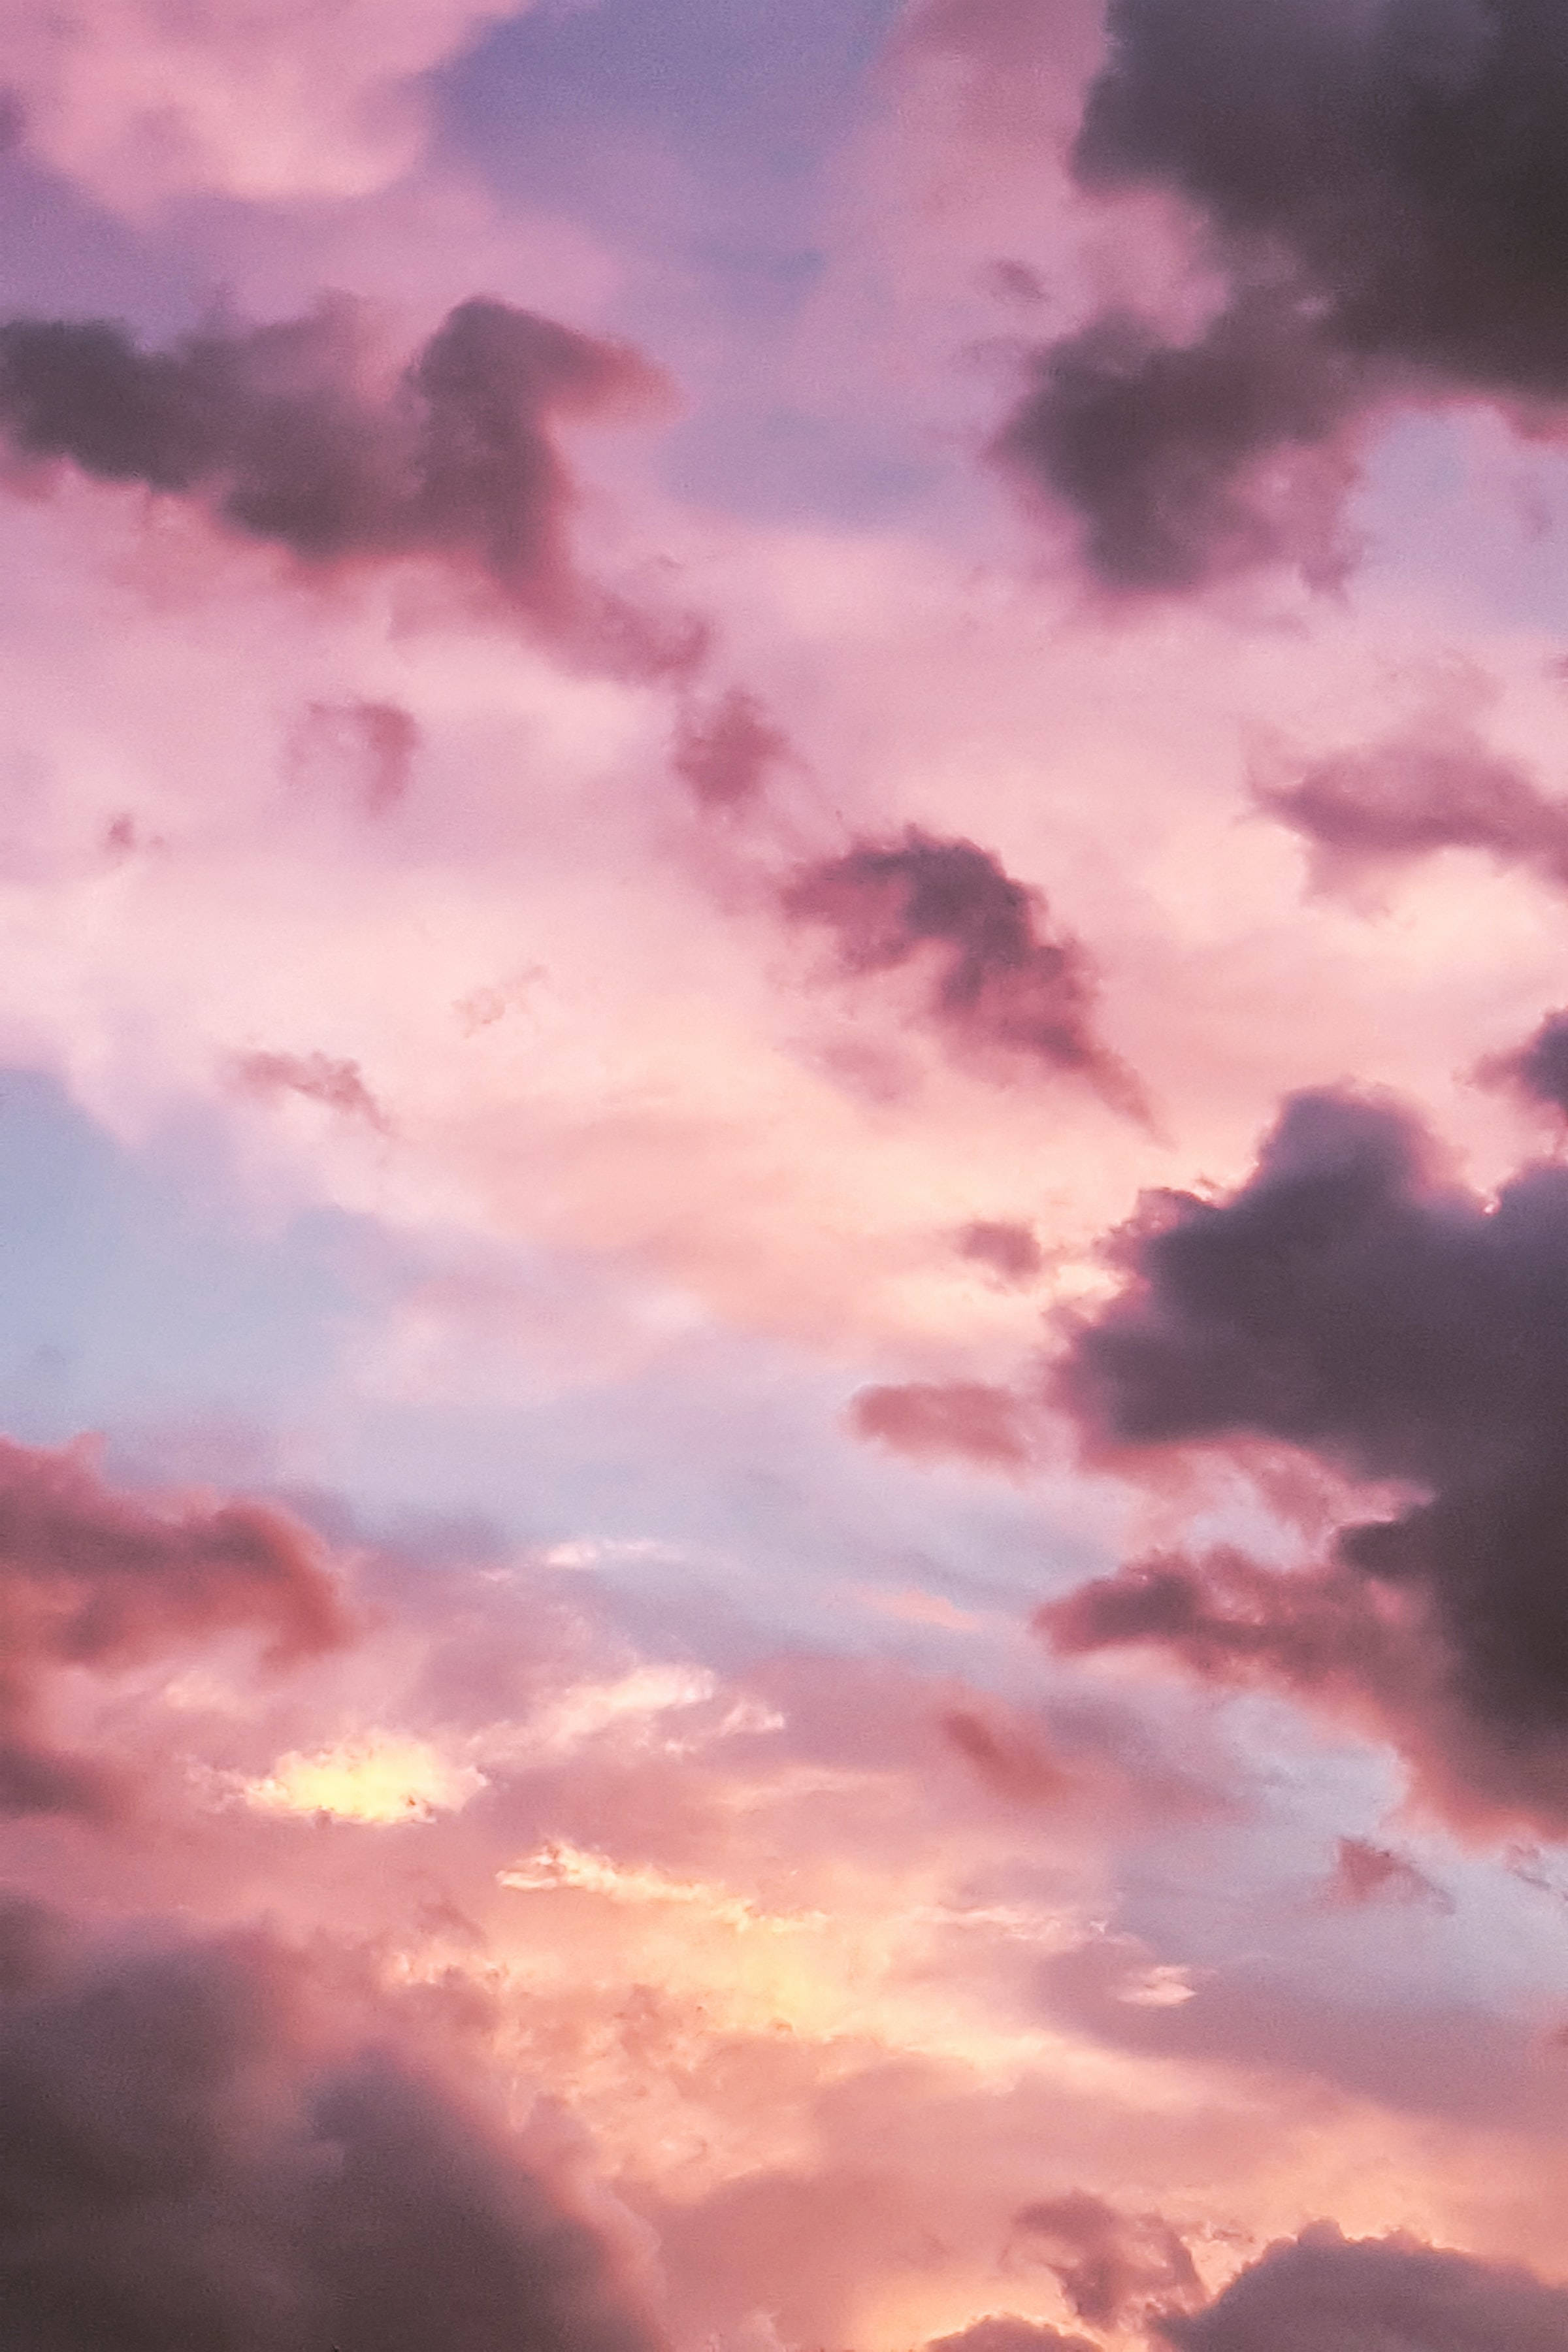 Cute Pink Aesthetic Sky With Overcast Clouds